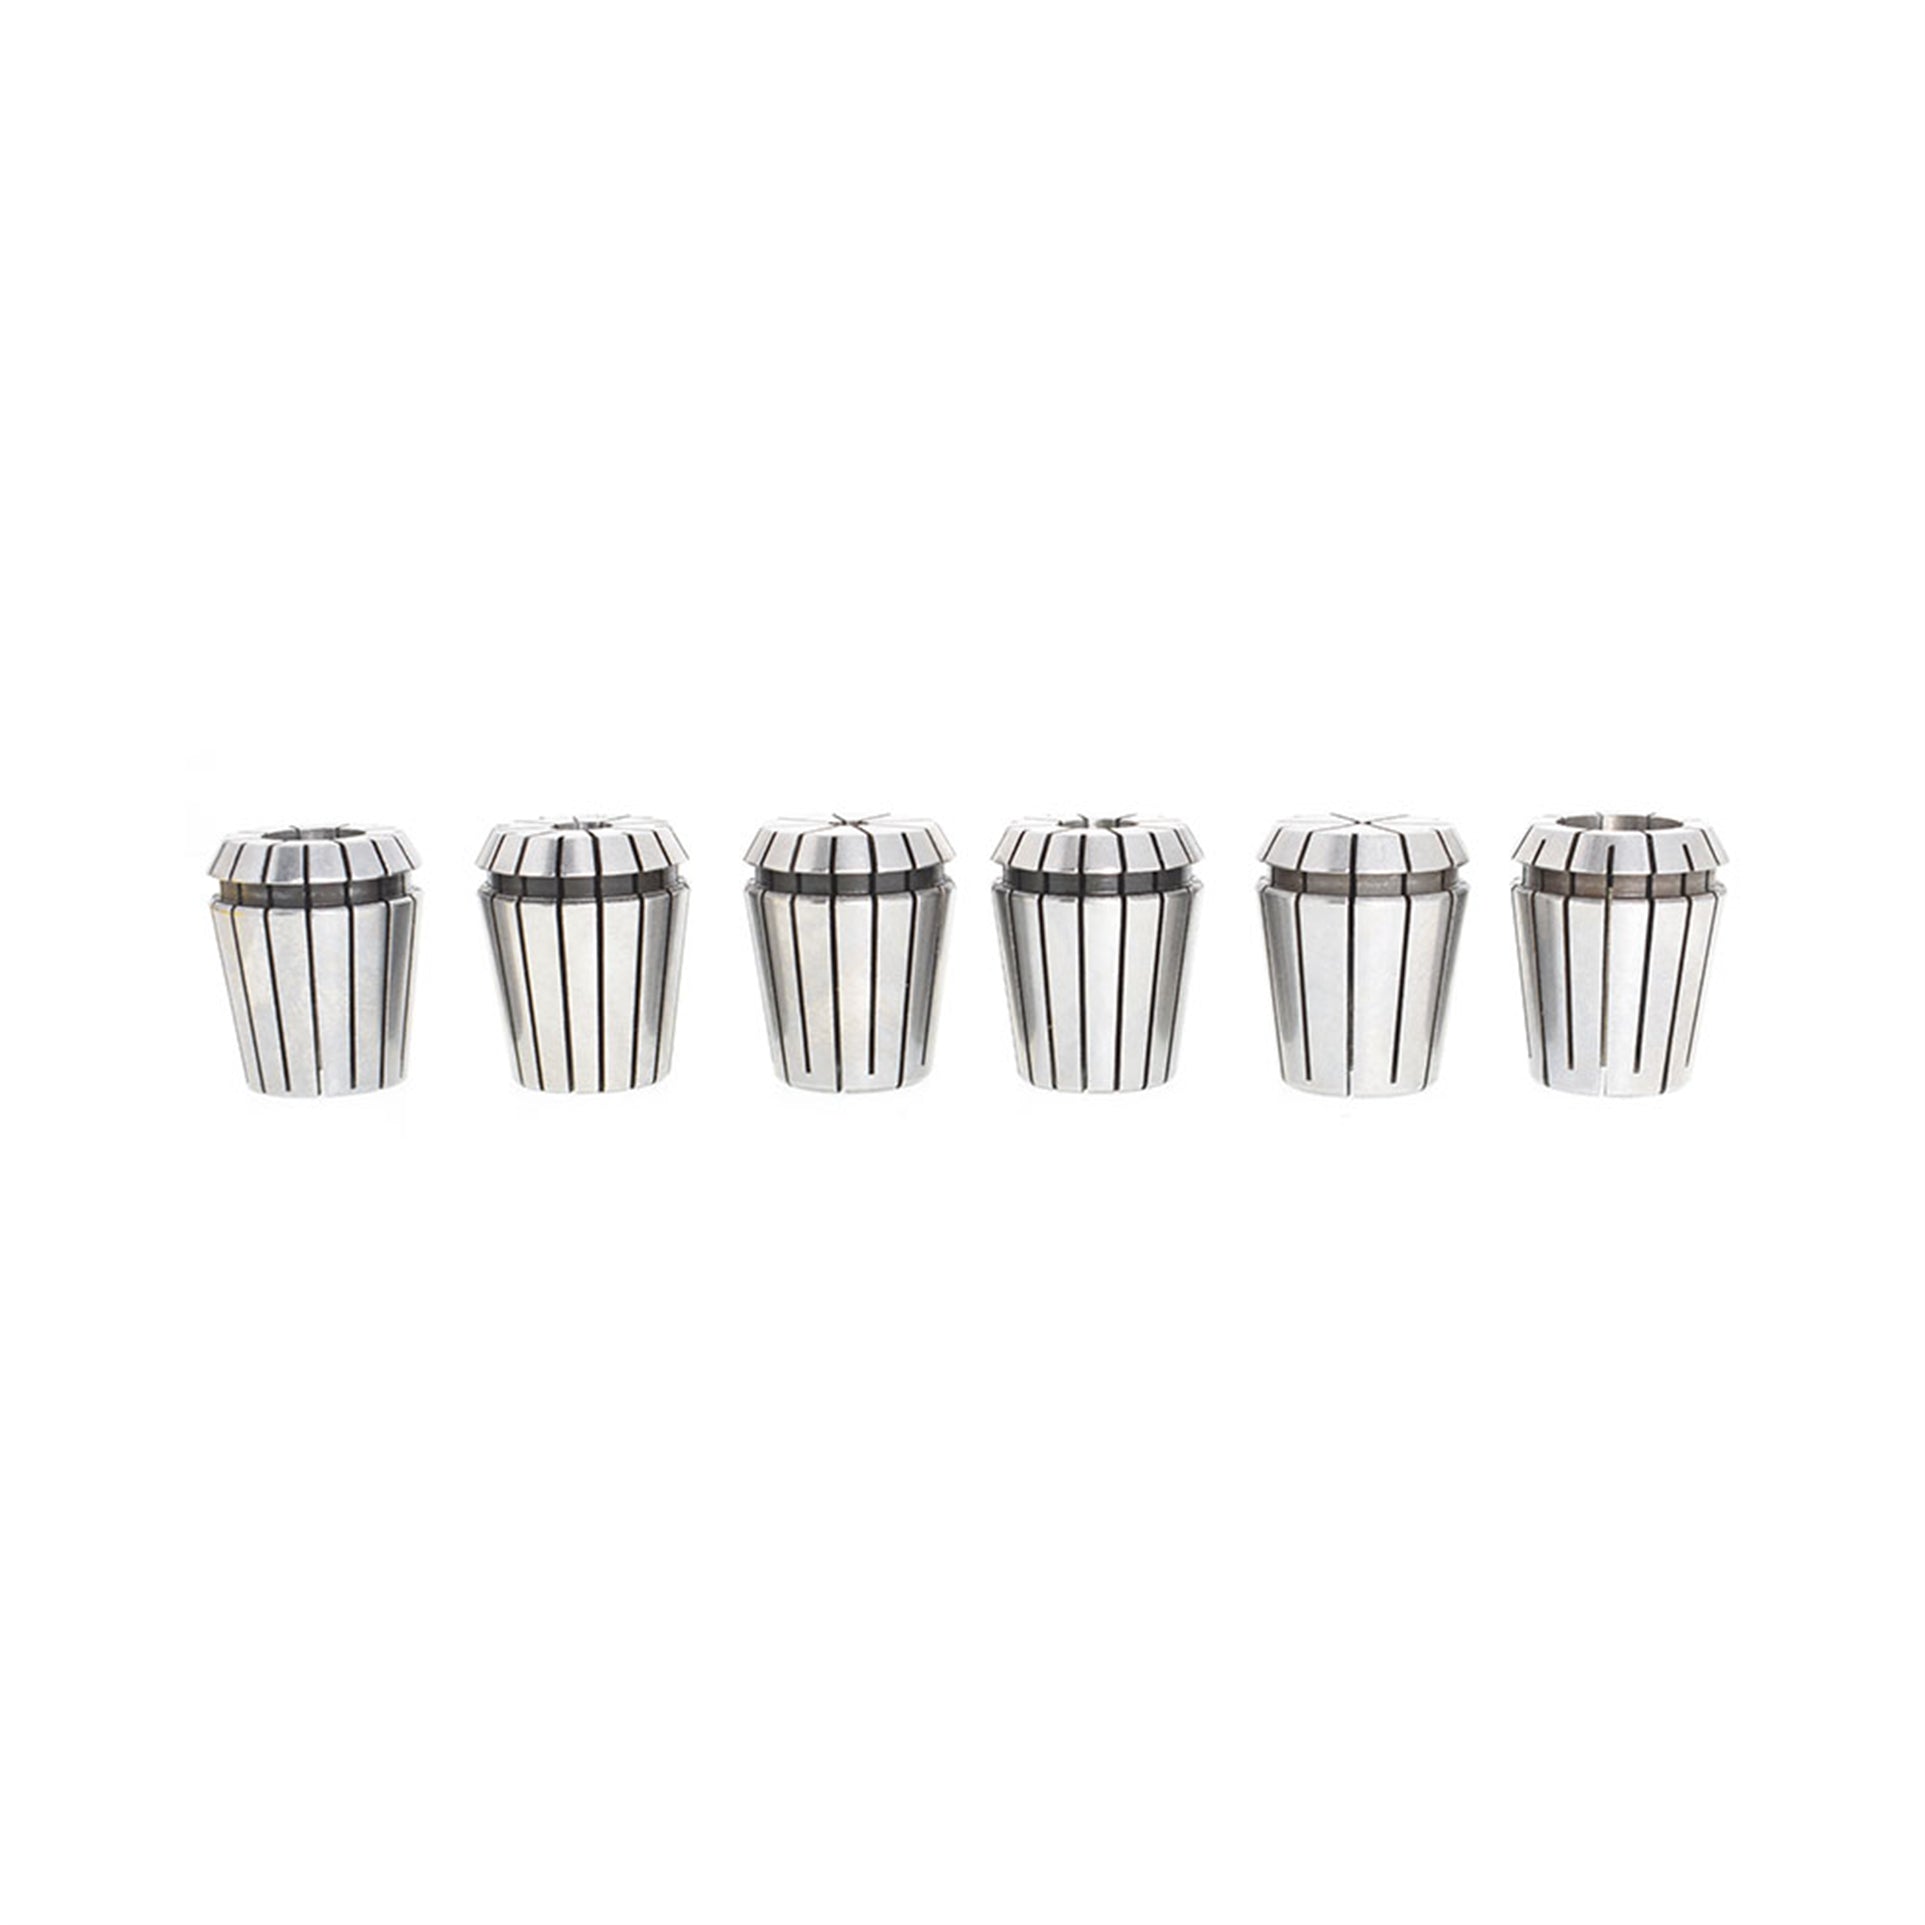 findmall 6Pcs ER32 Precision Spring Collet Set 1/8-3/4 for CNC Milling Lathe Tool and Work-Holding Engraving Machine FINDMALLPARTS